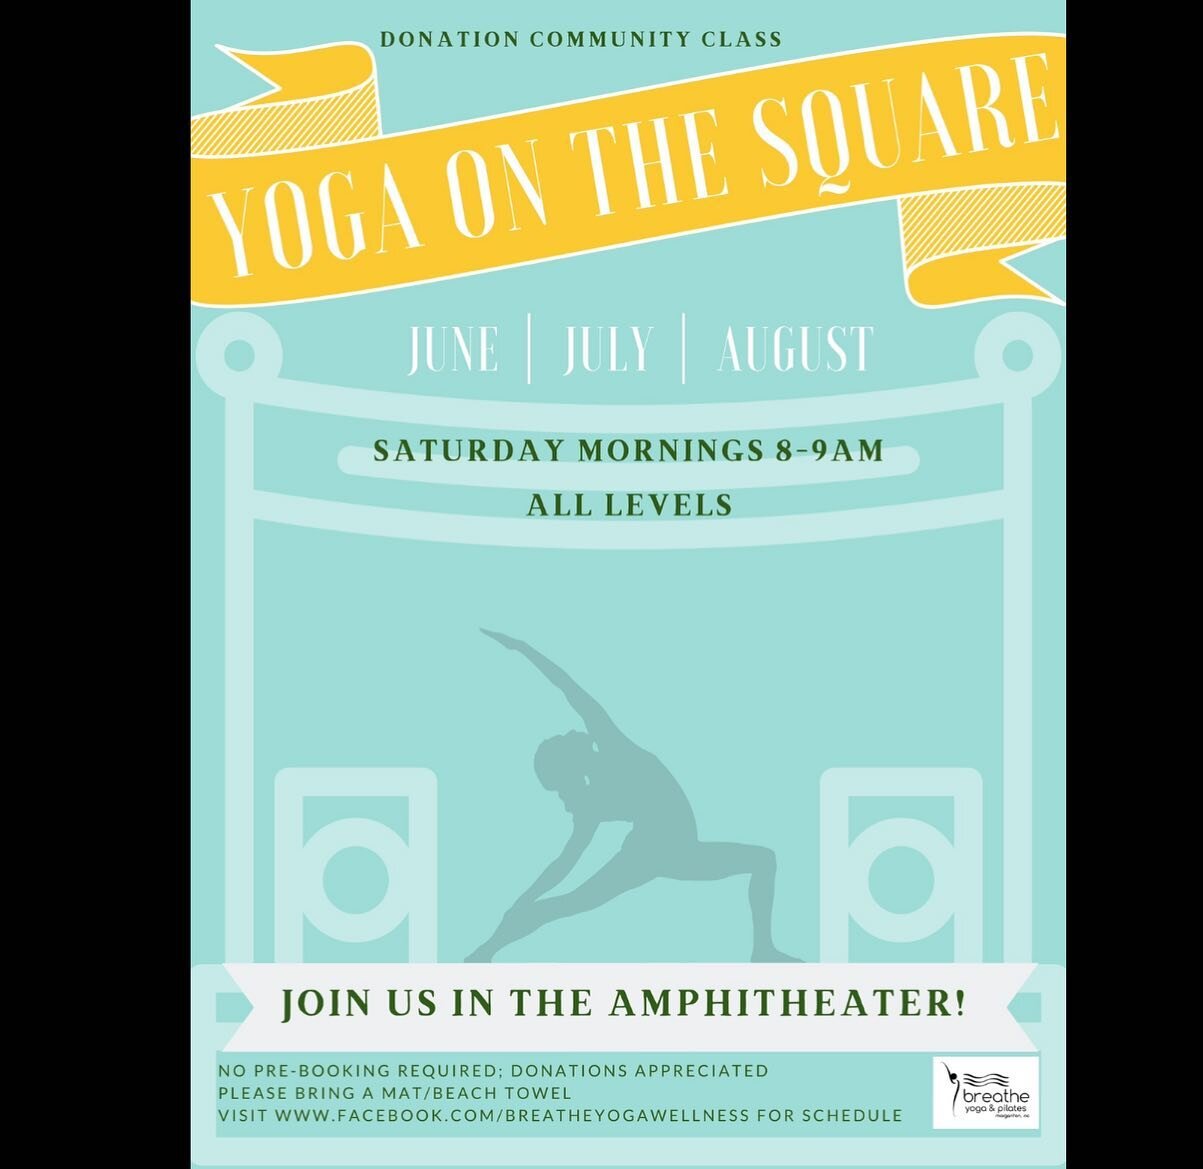 It&rsquo;s already out last Saturday!  Join Lizzie on august 27th for yoga on the square from 8-9am! 

No membership required &mdash; it&rsquo;s a donation-based class! ✨